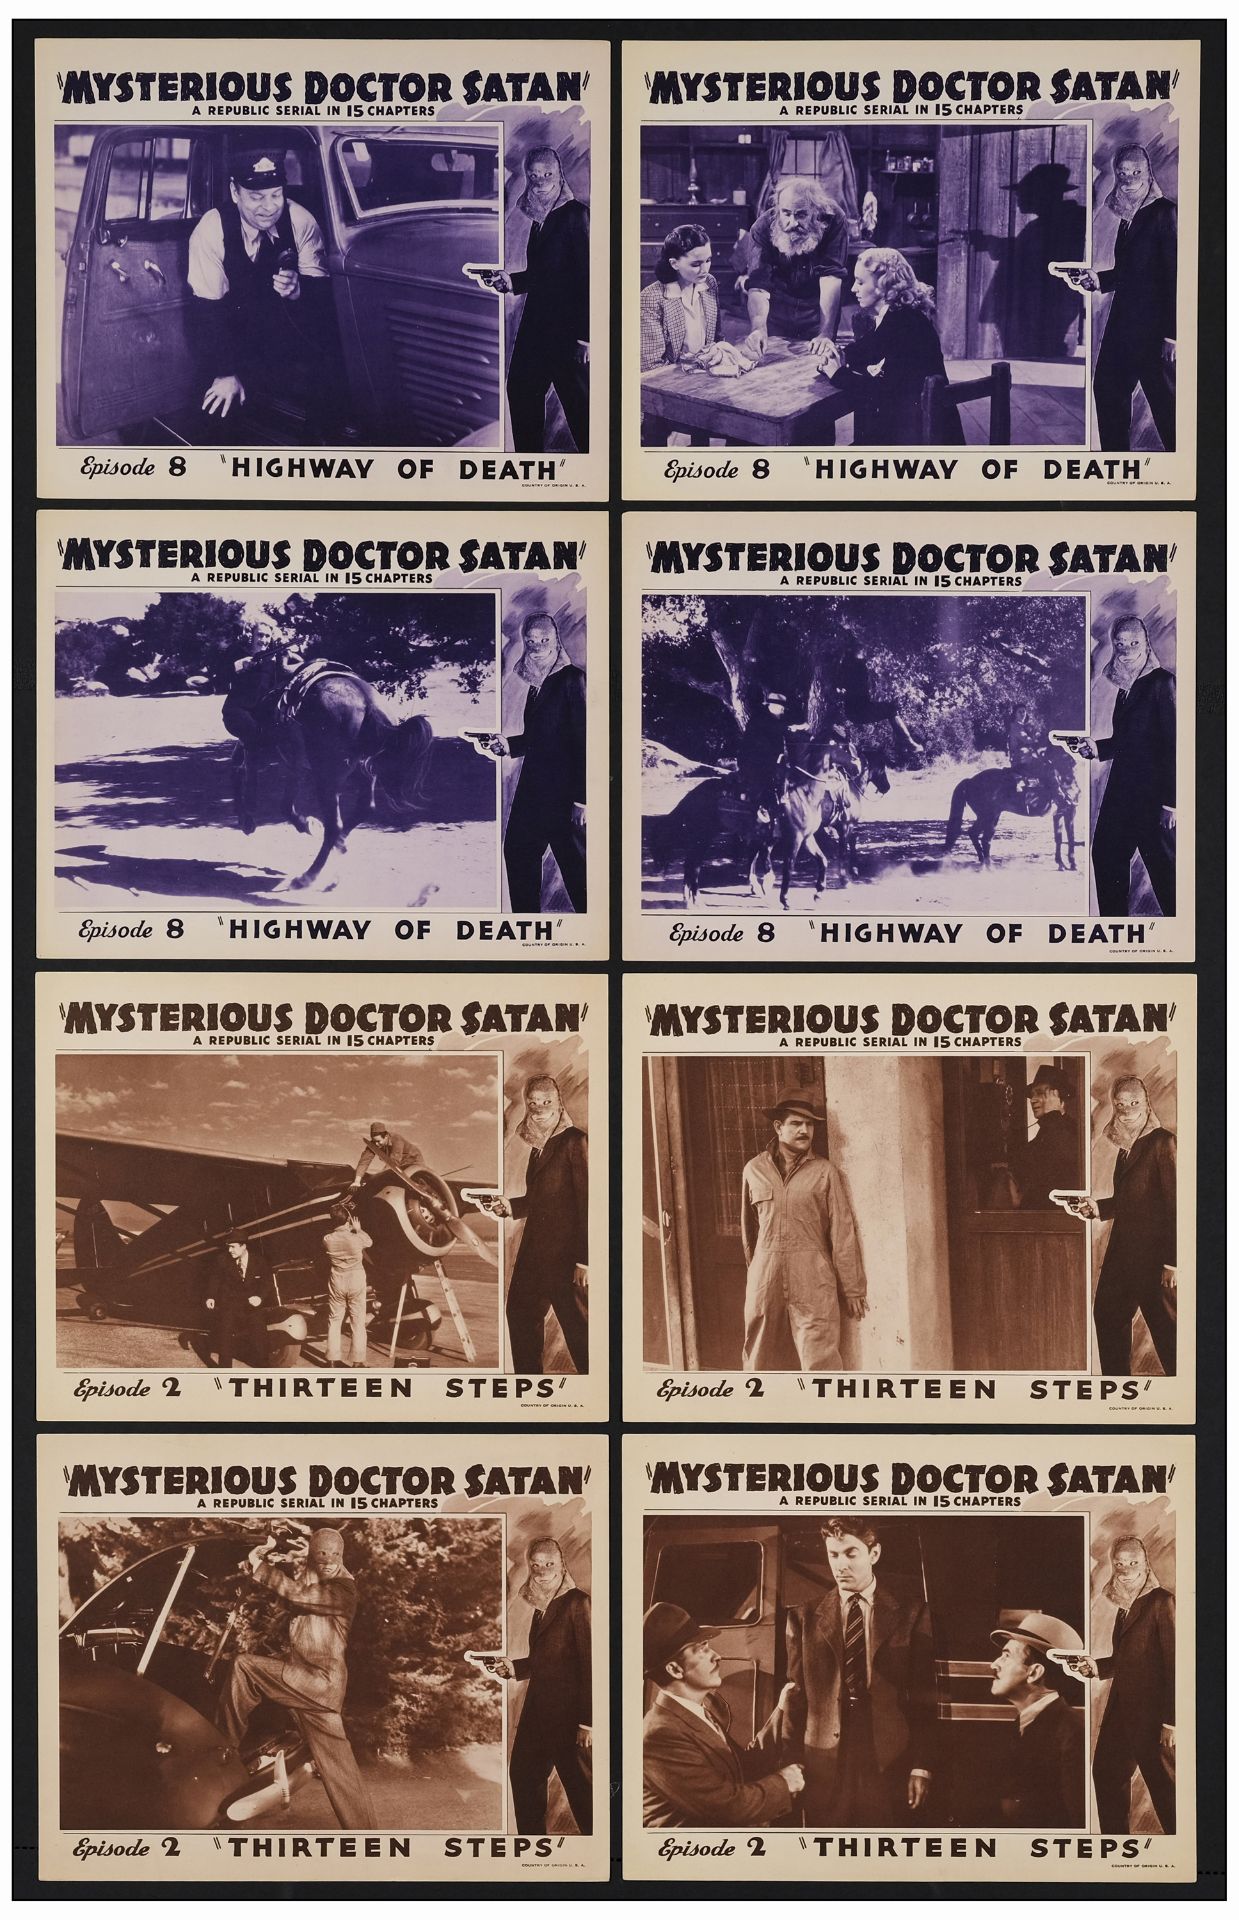 MYSTERIOUS DOCTOR SATAN - One Sheet and (2) Lobby Card Sets of 4 (27" x 41" & 11" x 14"); Very Fine - Image 2 of 3